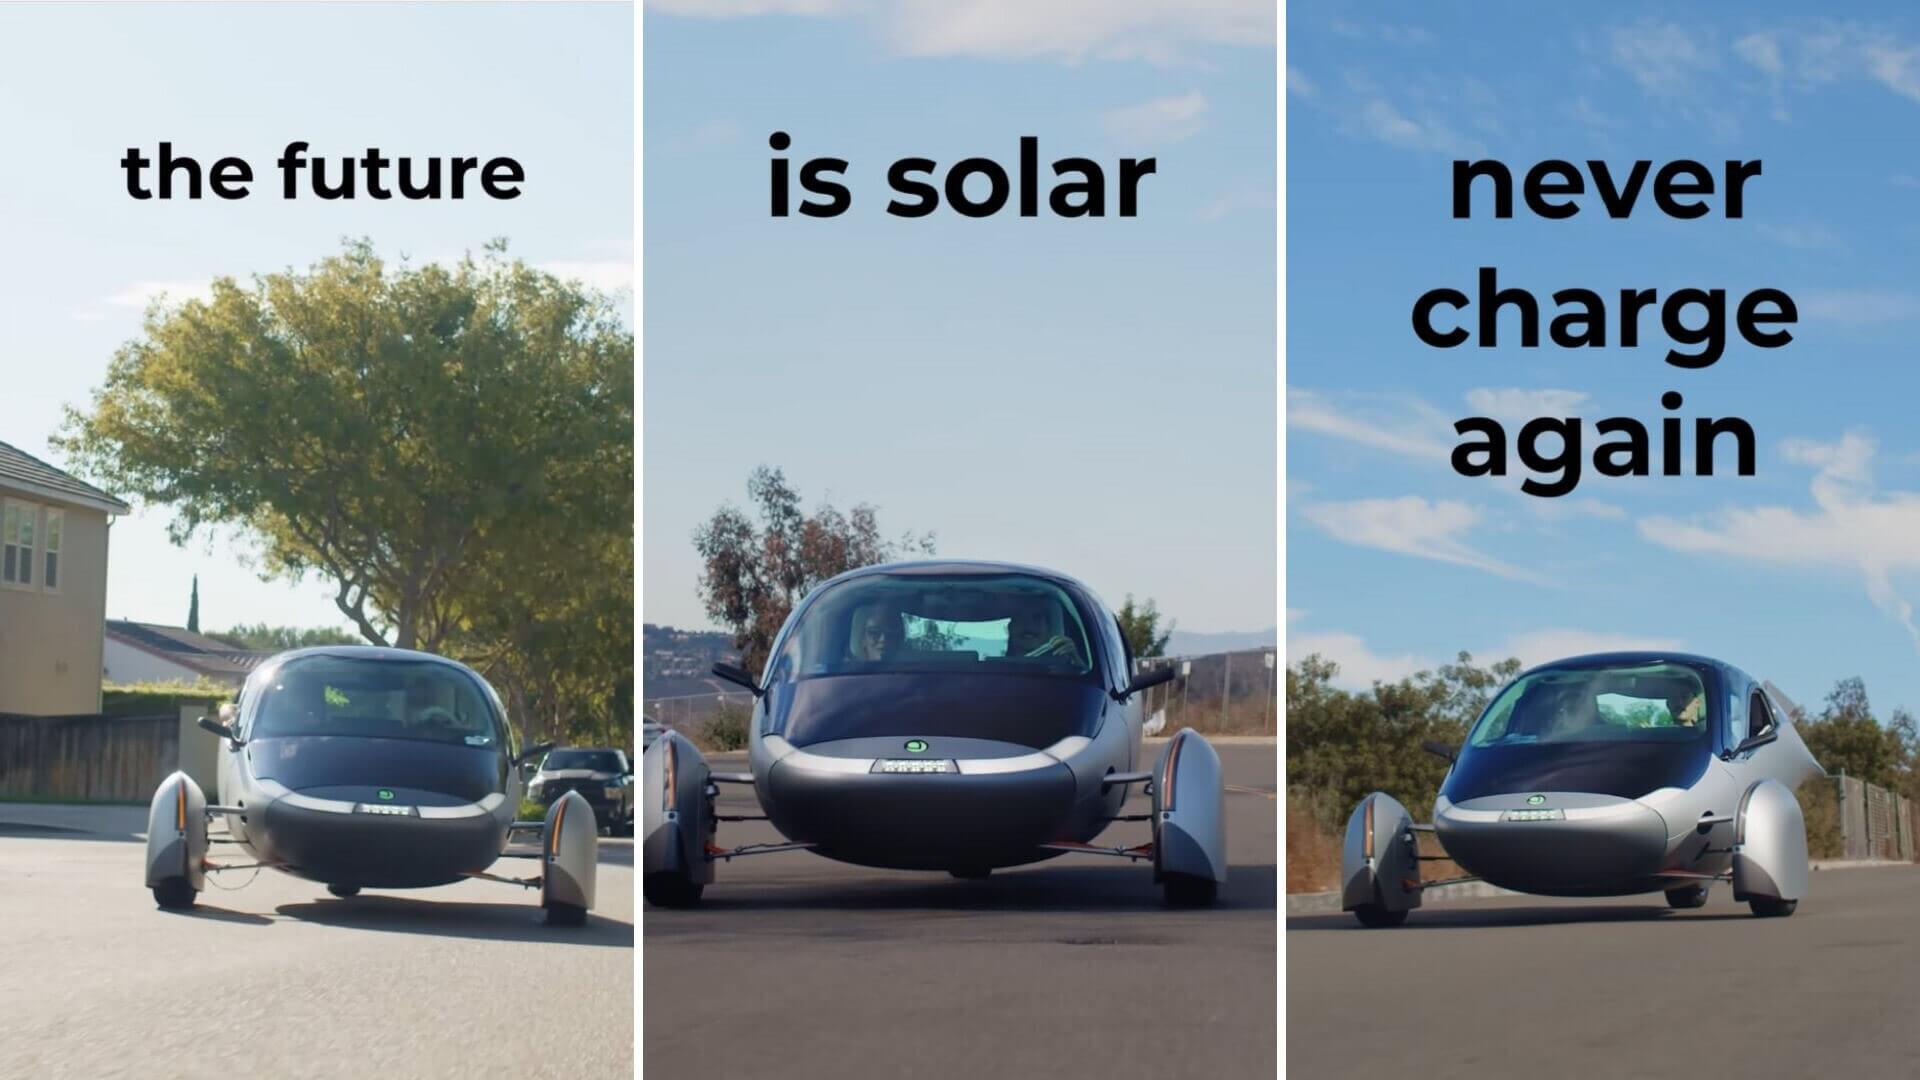 This new electric vehicle from Aptera Motors can run on sun power